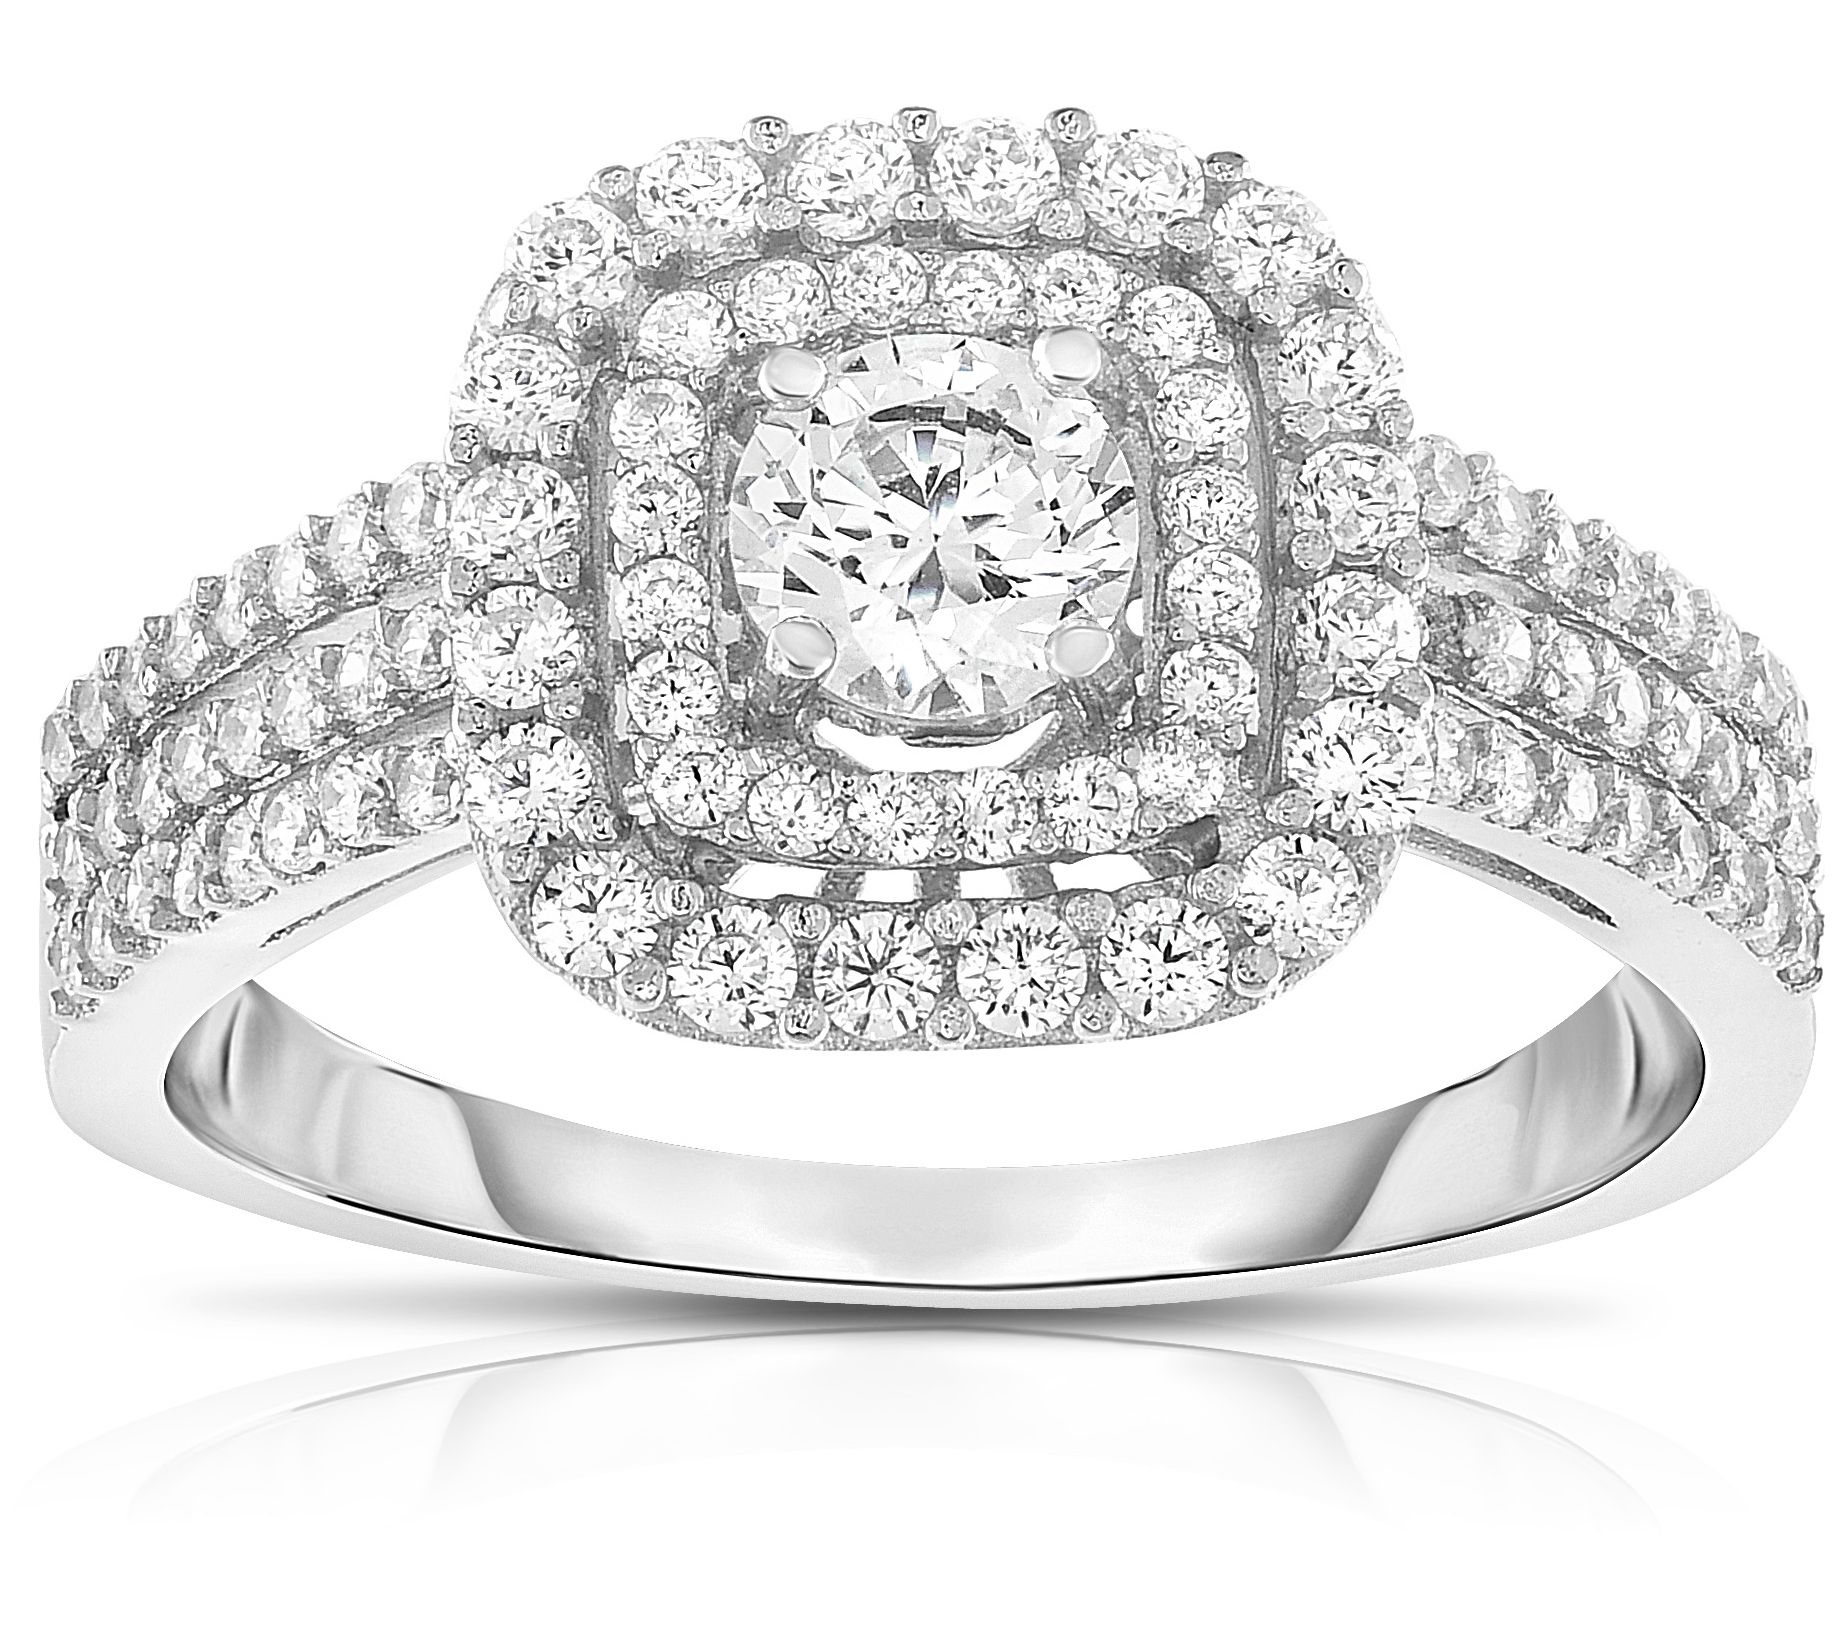 Affinity 1.00 cttw Double Halo Diamond Ring, 14K Gold - QVC.com